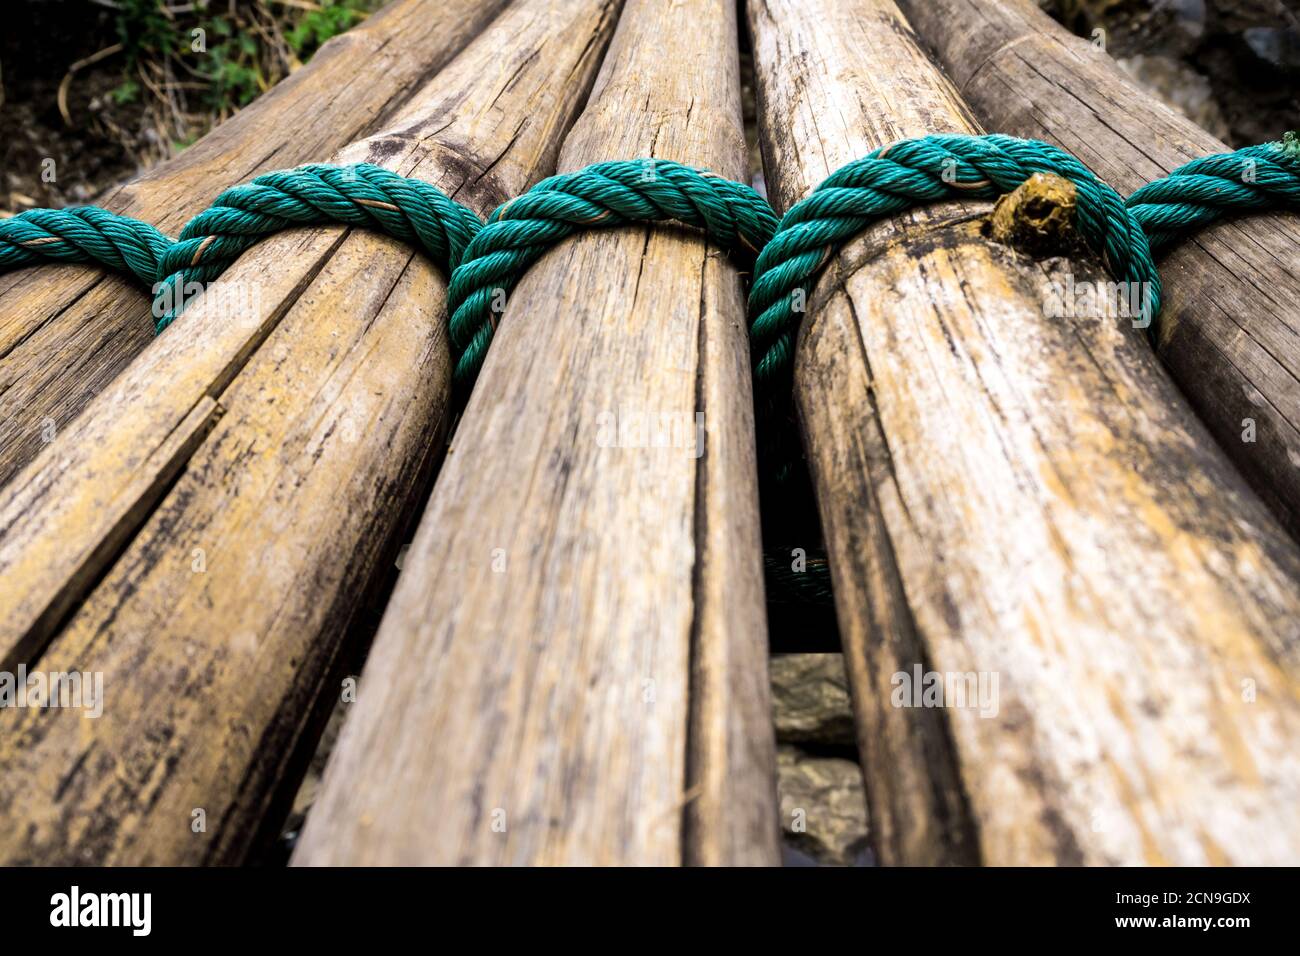 https://c8.alamy.com/comp/2CN9GDX/dried-bamboo-tie-with-green-nylon-rope-as-a-small-bridge-2CN9GDX.jpg